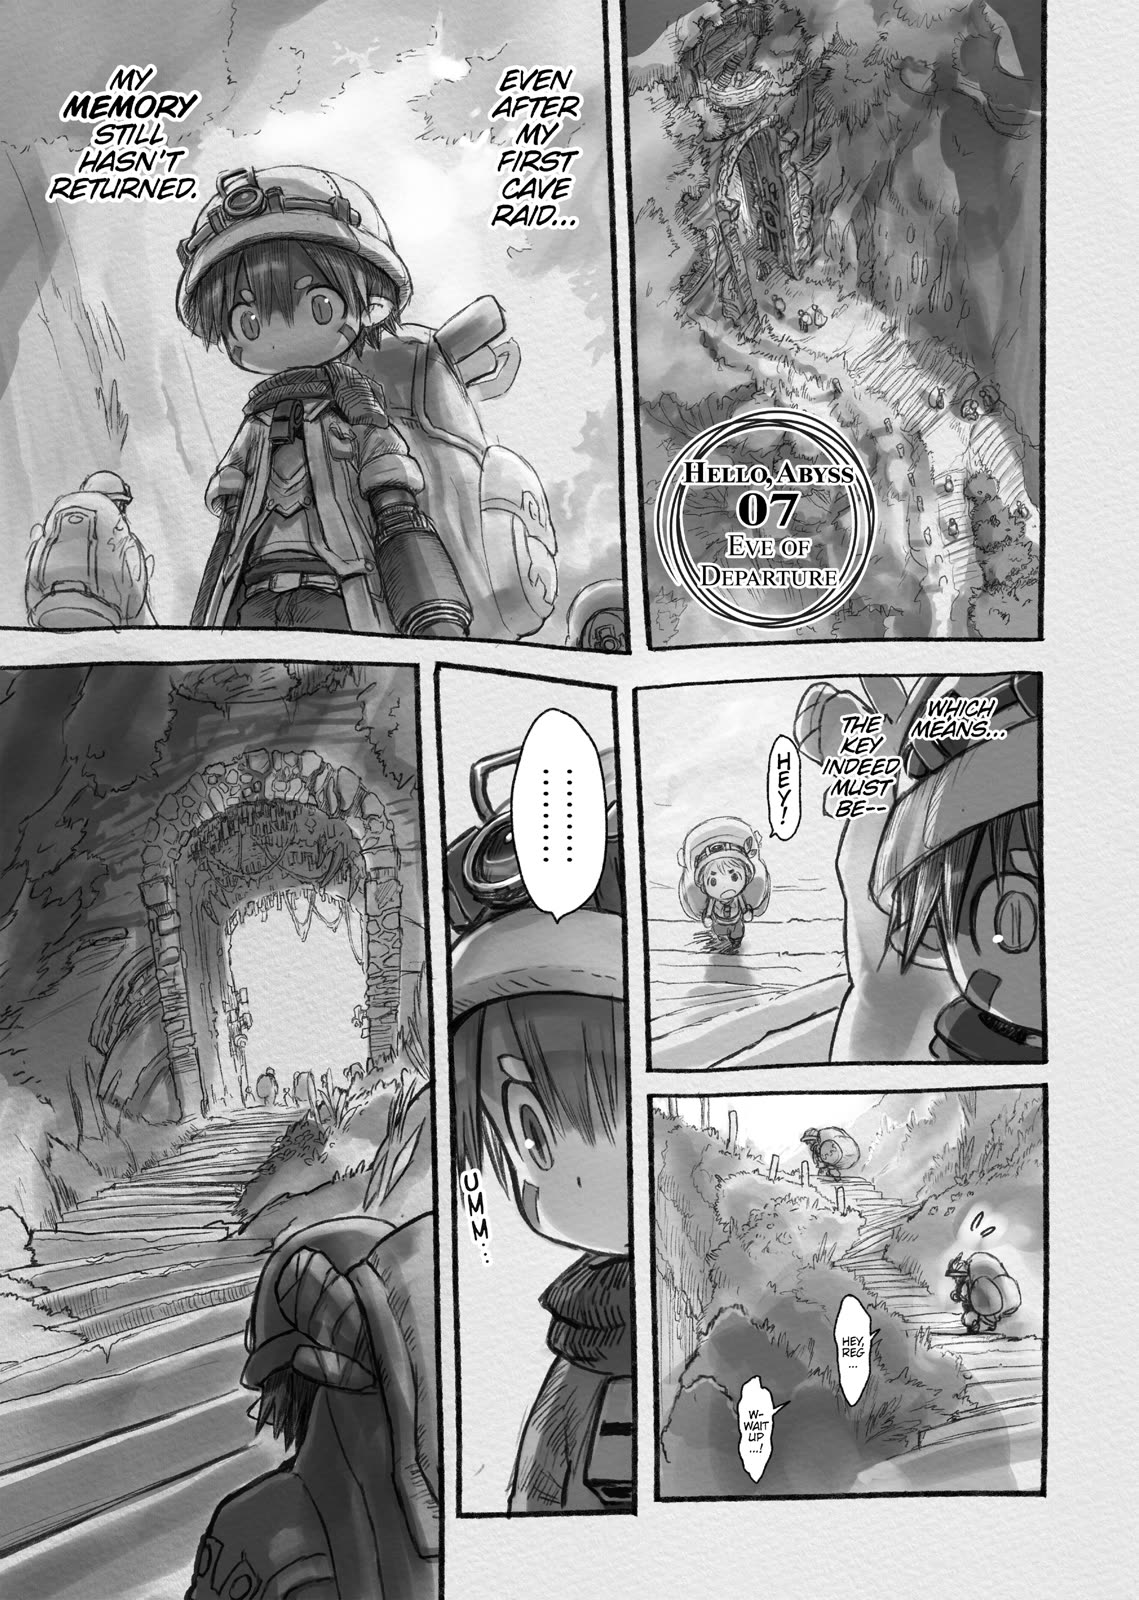 Made in Abyss Chapter 049, Made in Abyss Wiki